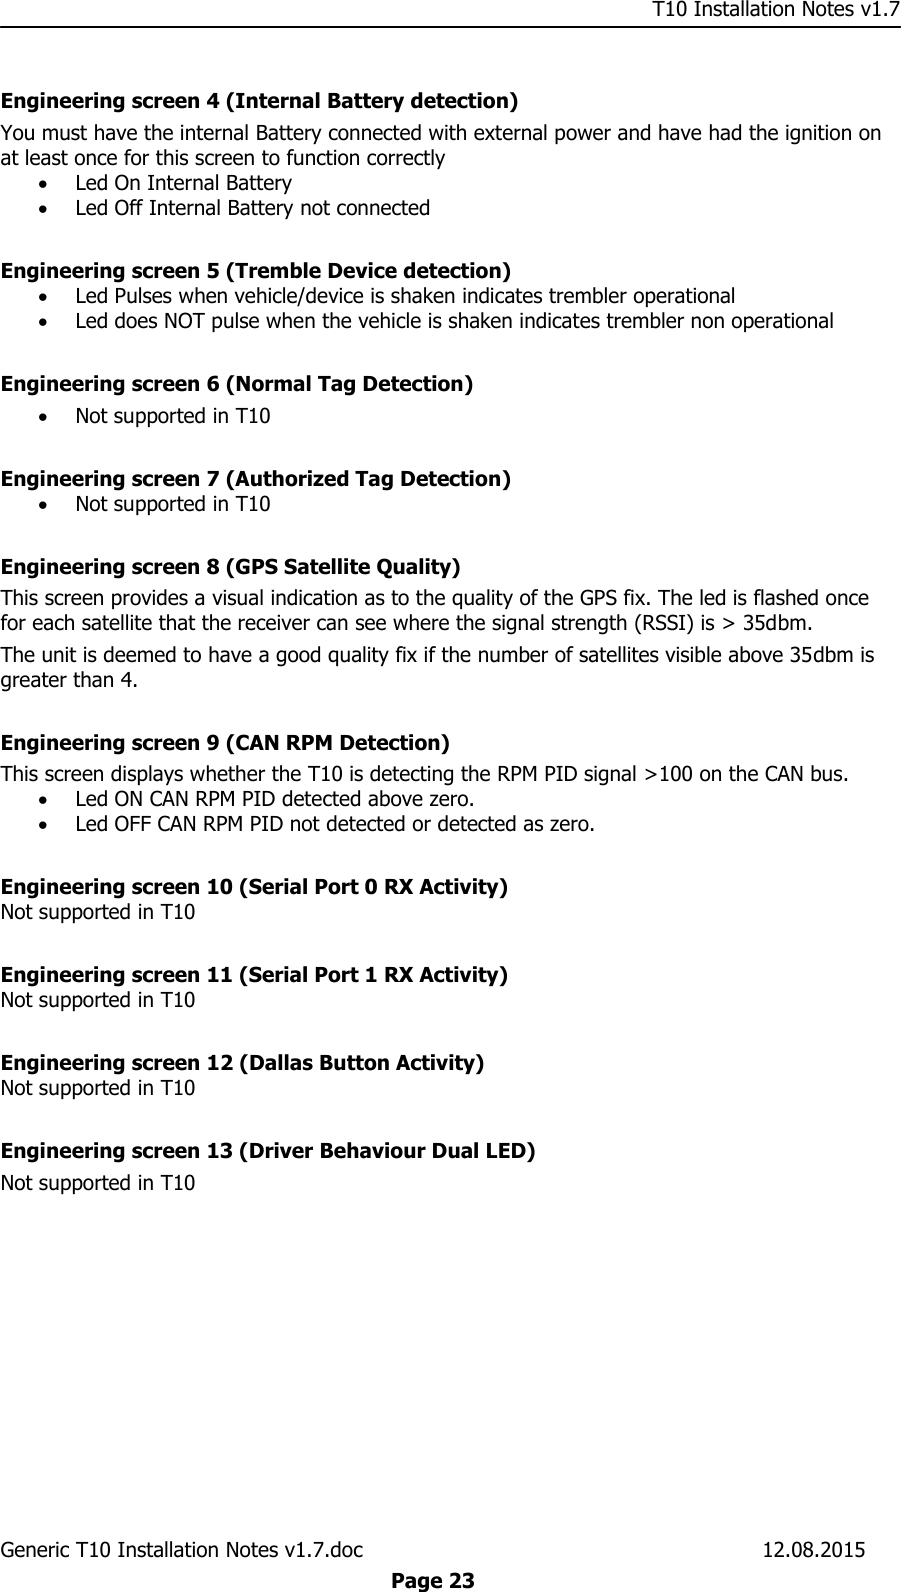     T10 Installation Notes v1.7 Generic T10 Installation Notes v1.7.doc    12.08.2015  Page 23  Engineering screen 4 (Internal Battery detection) You must have the internal Battery connected with external power and have had the ignition on at least once for this screen to function correctly  Led On Internal Battery  Led Off Internal Battery not connected  Engineering screen 5 (Tremble Device detection)  Led Pulses when vehicle/device is shaken indicates trembler operational  Led does NOT pulse when the vehicle is shaken indicates trembler non operational  Engineering screen 6 (Normal Tag Detection)  Not supported in T10   Engineering screen 7 (Authorized Tag Detection)   Not supported in T10   Engineering screen 8 (GPS Satellite Quality) This screen provides a visual indication as to the quality of the GPS fix. The led is flashed once for each satellite that the receiver can see where the signal strength (RSSI) is &gt; 35dbm. The unit is deemed to have a good quality fix if the number of satellites visible above 35dbm is greater than 4.  Engineering screen 9 (CAN RPM Detection)  This screen displays whether the T10 is detecting the RPM PID signal &gt;100 on the CAN bus.  Led ON CAN RPM PID detected above zero.  Led OFF CAN RPM PID not detected or detected as zero.  Engineering screen 10 (Serial Port 0 RX Activity) Not supported in T10   Engineering screen 11 (Serial Port 1 RX Activity)  Not supported in T10   Engineering screen 12 (Dallas Button Activity) Not supported in T10   Engineering screen 13 (Driver Behaviour Dual LED) Not supported in T10  